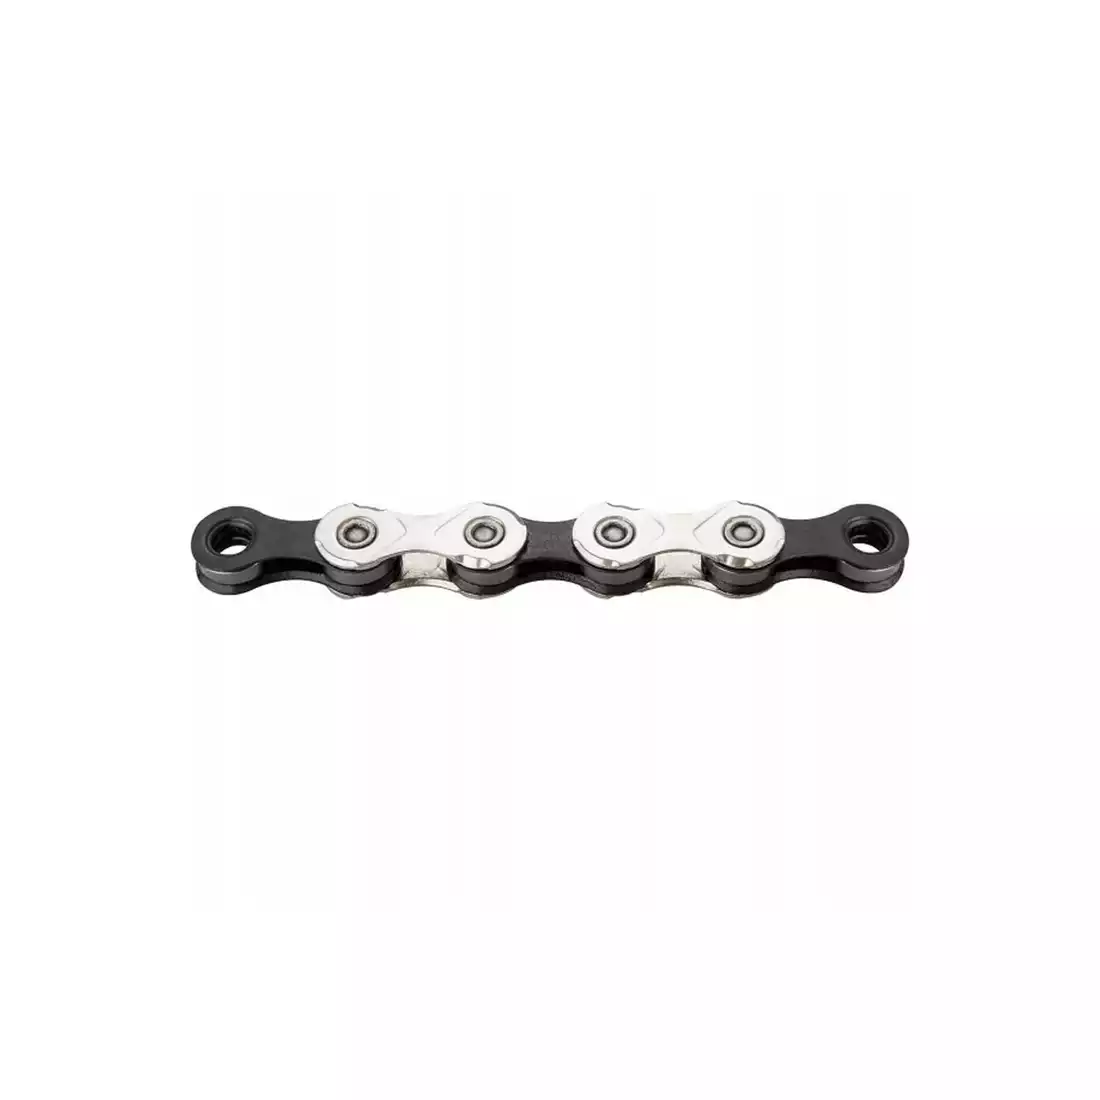 KMC X12 bicycle chain 12 speed, 126 links, silver black